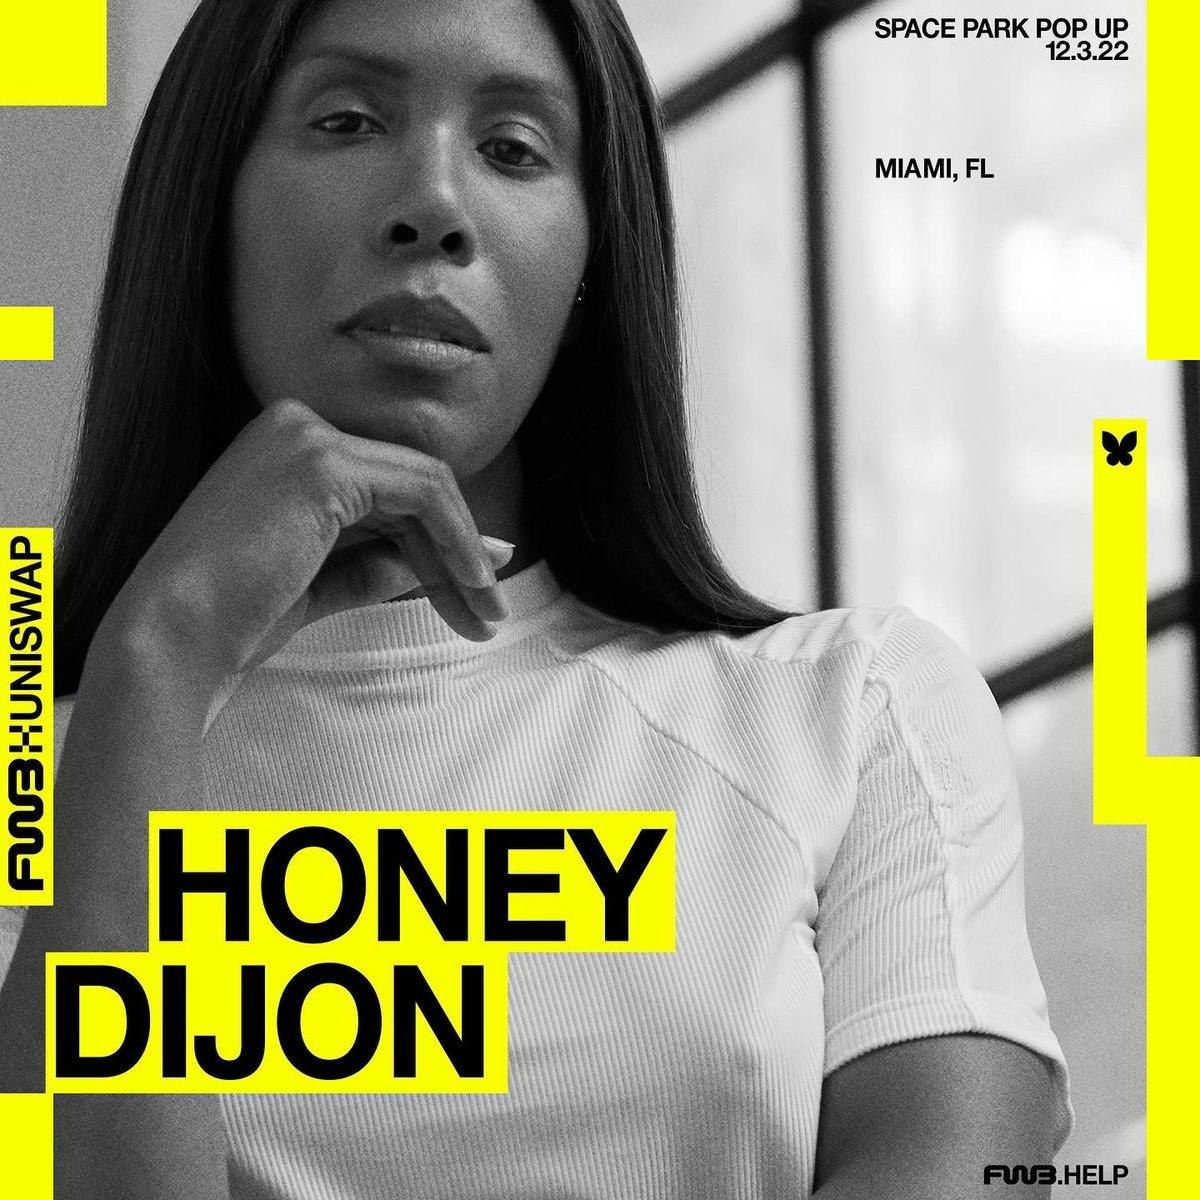 🪩 TOMORROW: the squad is linking up with @Uniswap in Miam to bring you an all night heater featuring @HONEYDIJON + friends 
🍯😮‍💨🦄🌴✨🐥🐥📍

RSVP: <a style='color: rgb(29,161,242); font-weight:normal; text-decoration: none' href='http://fwb.help/events' target='_blank'>fwb.help/events</a> 